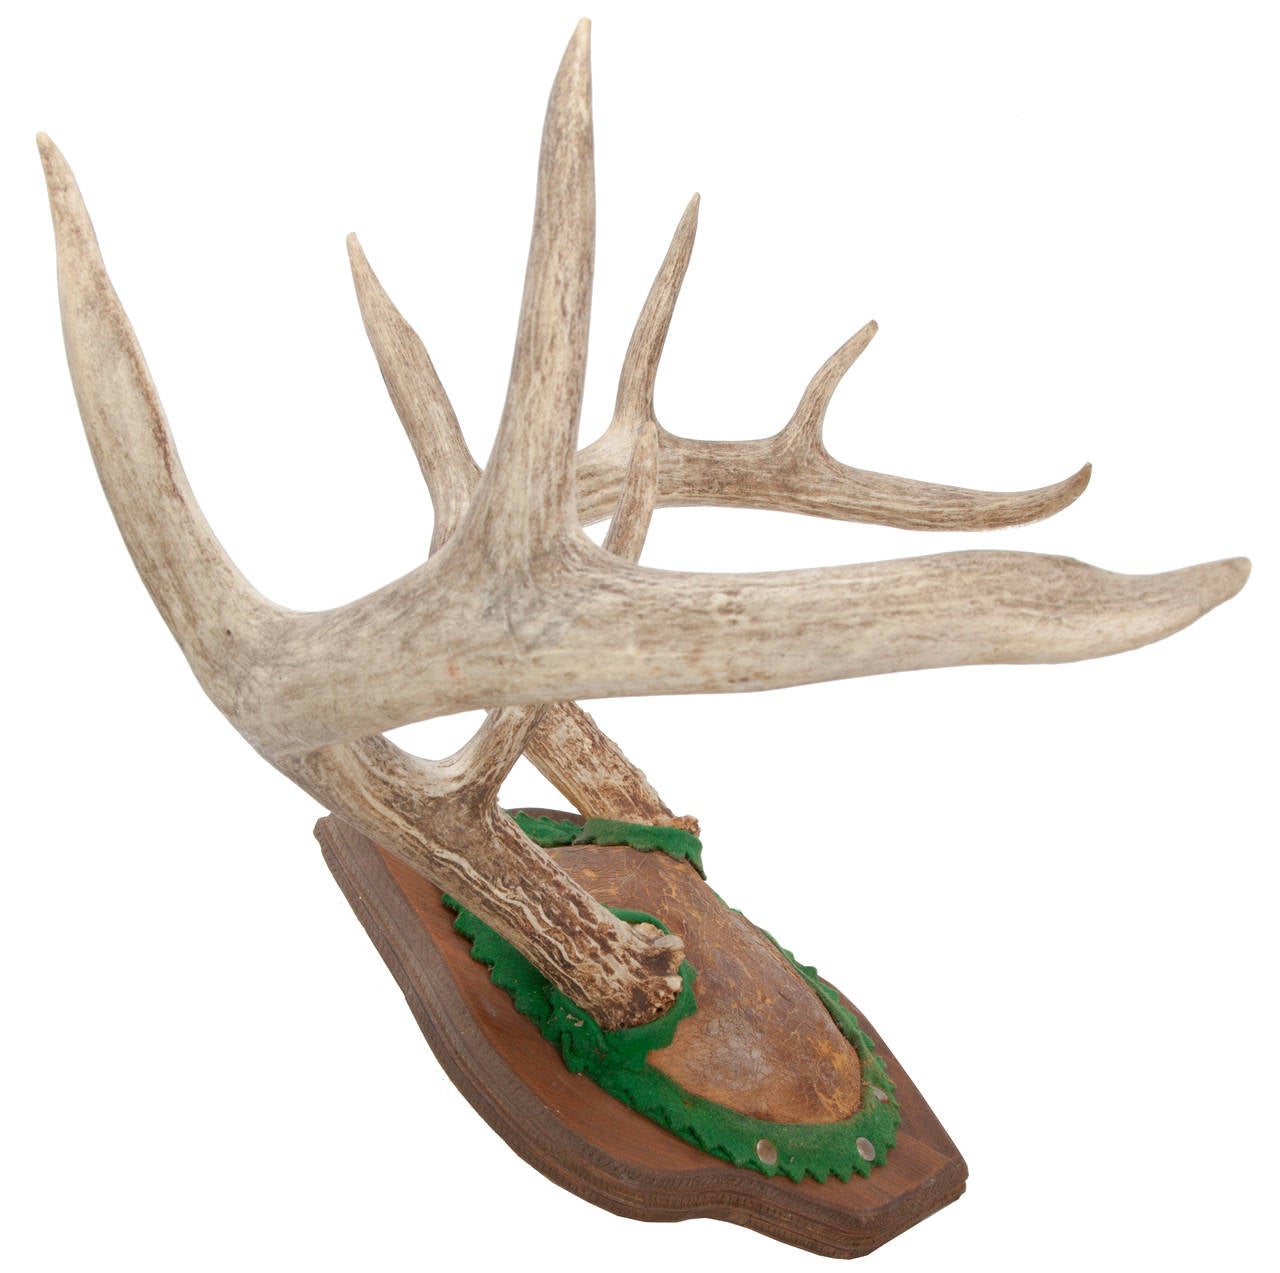 Nice 19th-century mounting of deer antlers on a shaped and molded wood plaque with cut green felt trim applied around the base of the antlers and all around the edges of the skull.